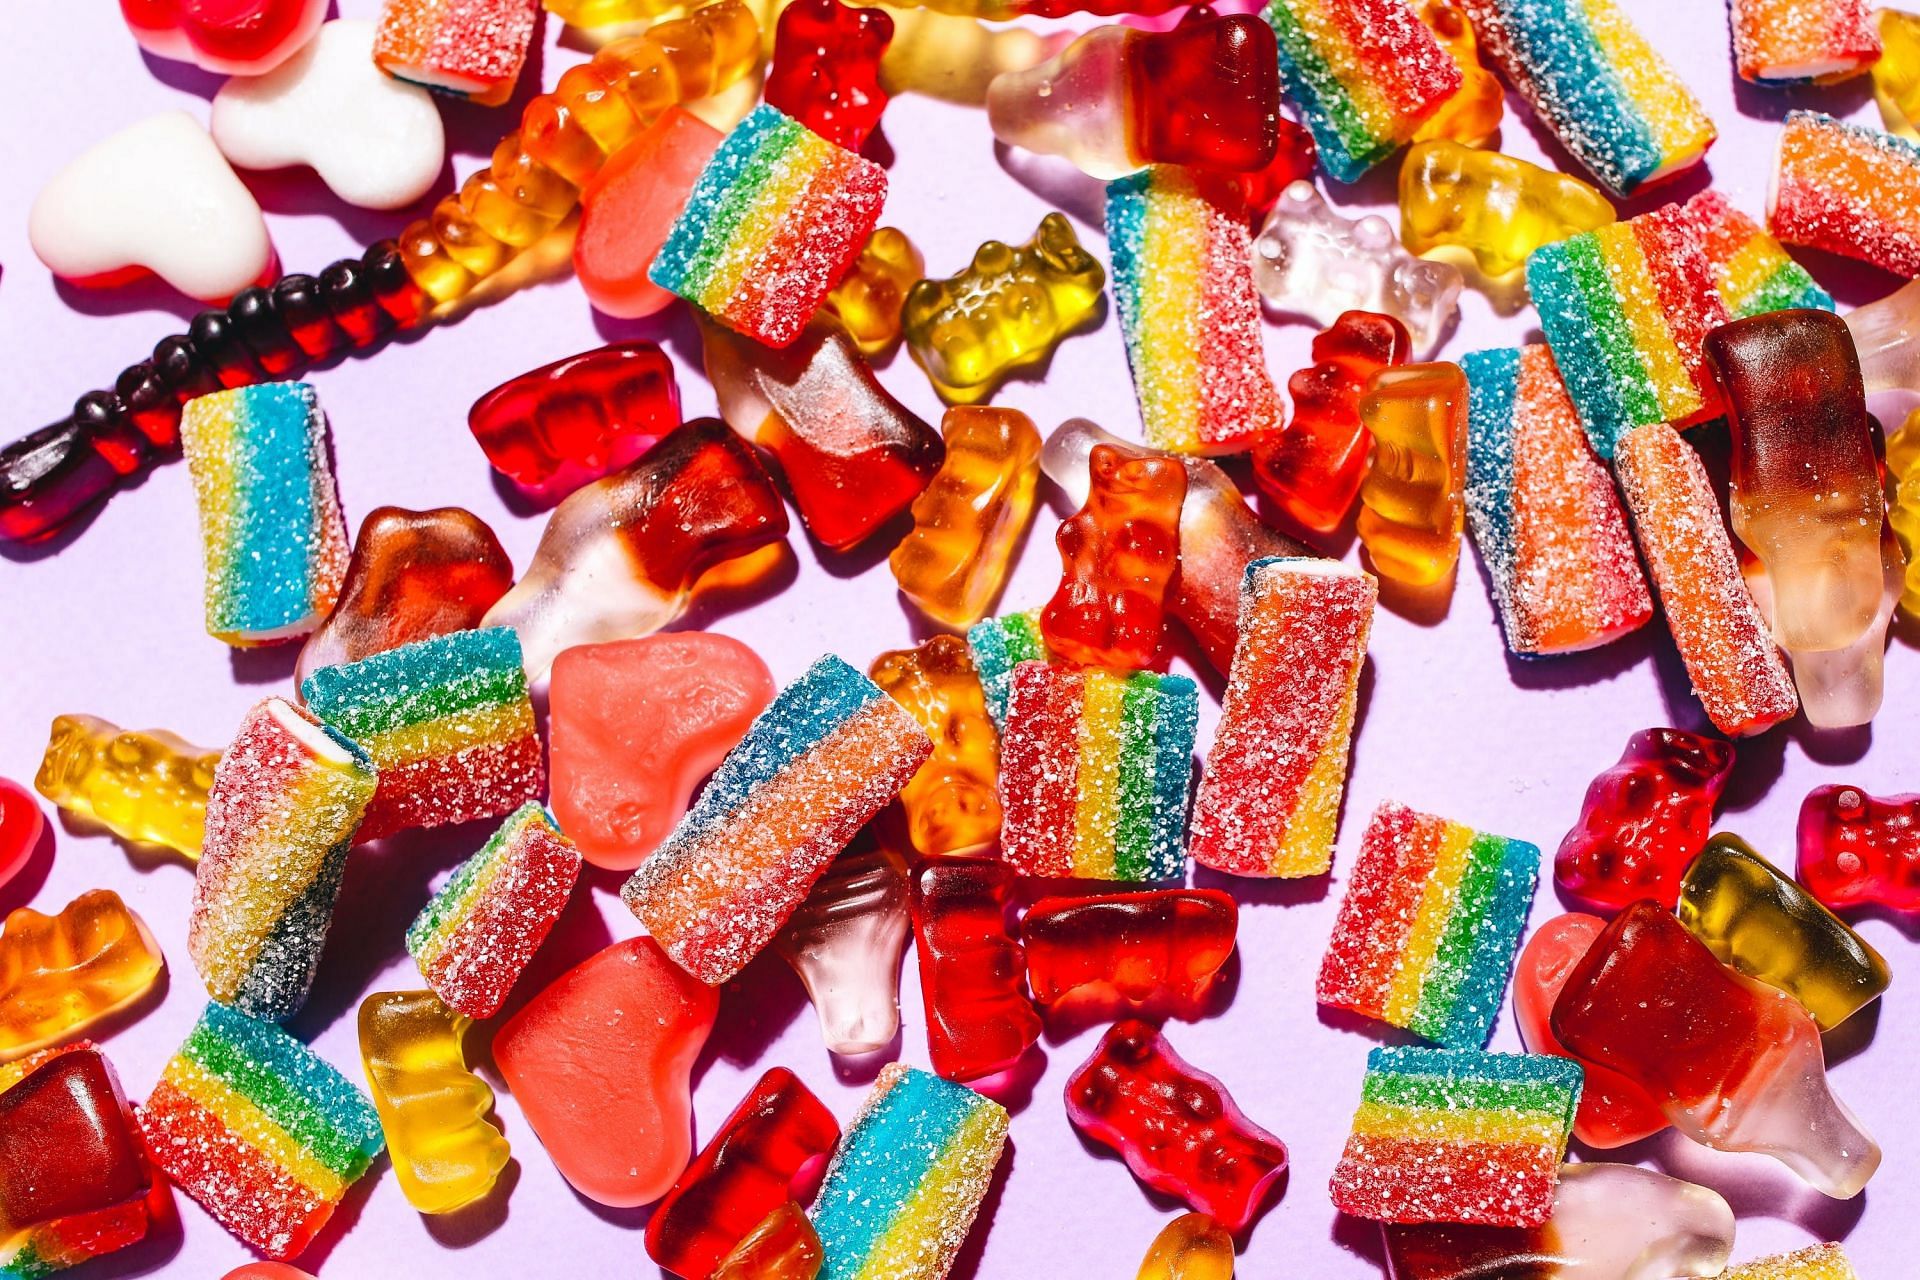 Importance of eating less sugary foods (image sourced via Pexels / Photo by polina)